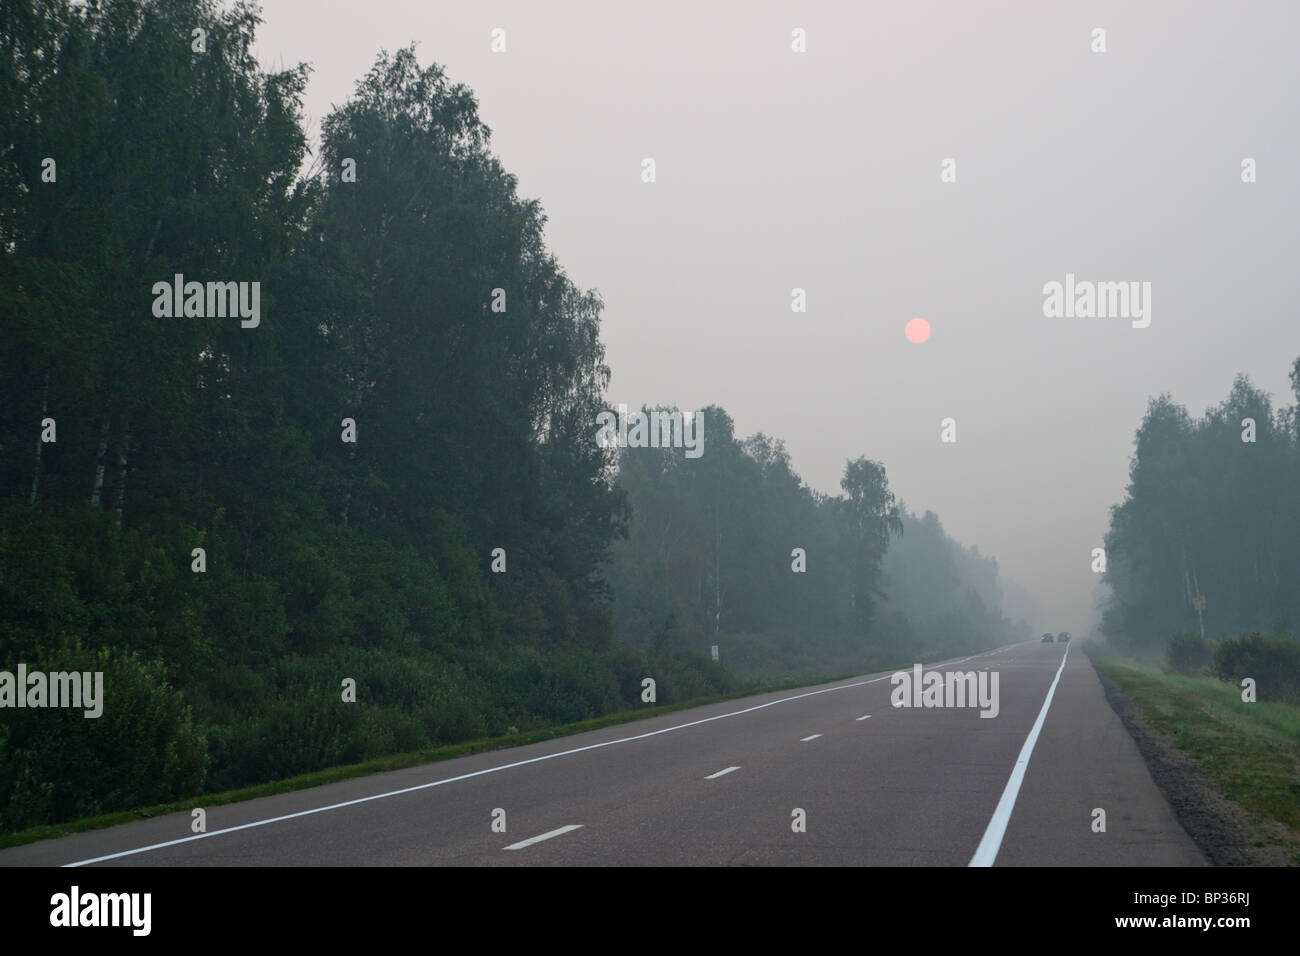 A road in smog of forest fires Stock Photo